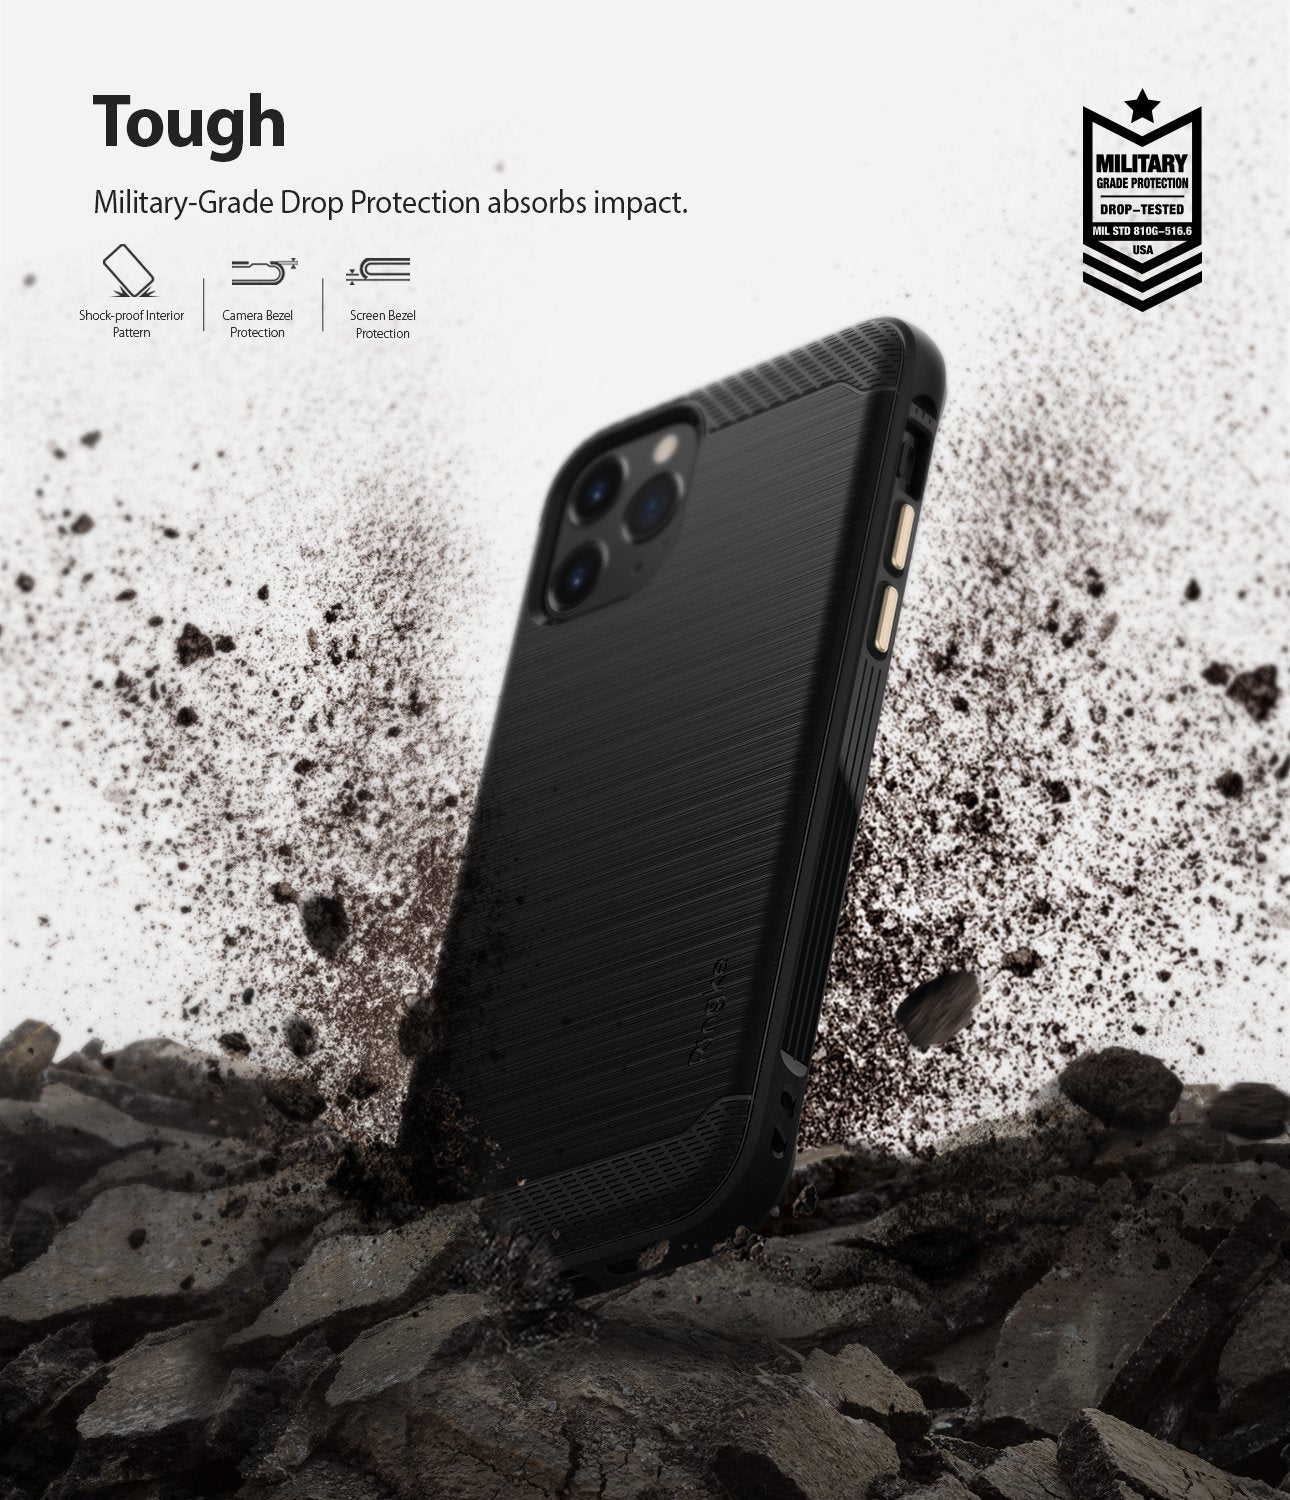 Ringke Onyx Case compatible with iPhone 11 Pro Black Military Grade Drop Protection